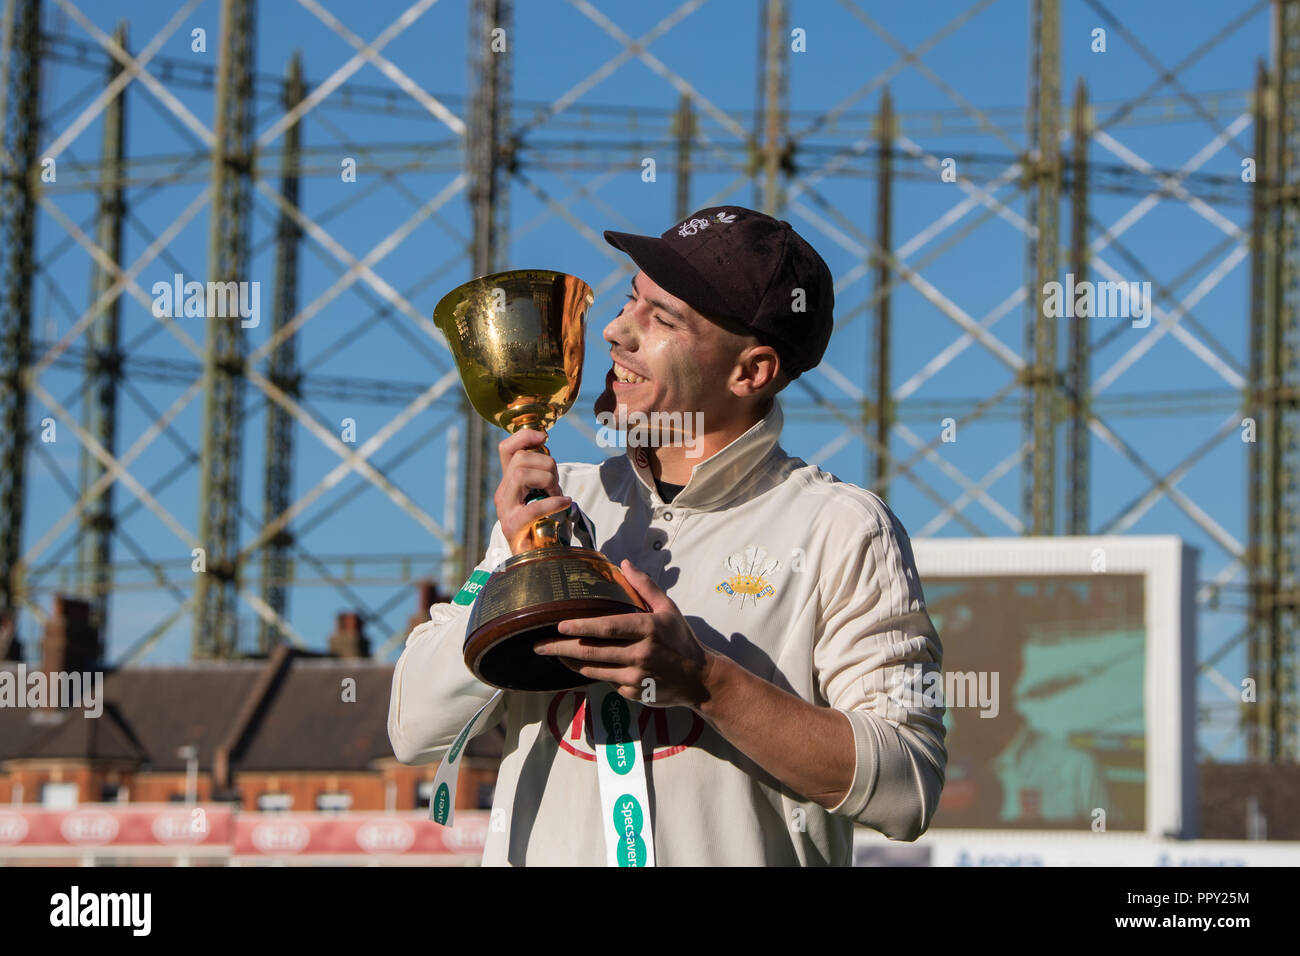 London, UK. 27 September 2018. Surrey captain Rory Burns prepares to Kiss the cup as Surrey County Cricket Club are crowned Specsavers County Champions in presentation at the Oval. David Rowe/Alamy Live News. Stock Photo